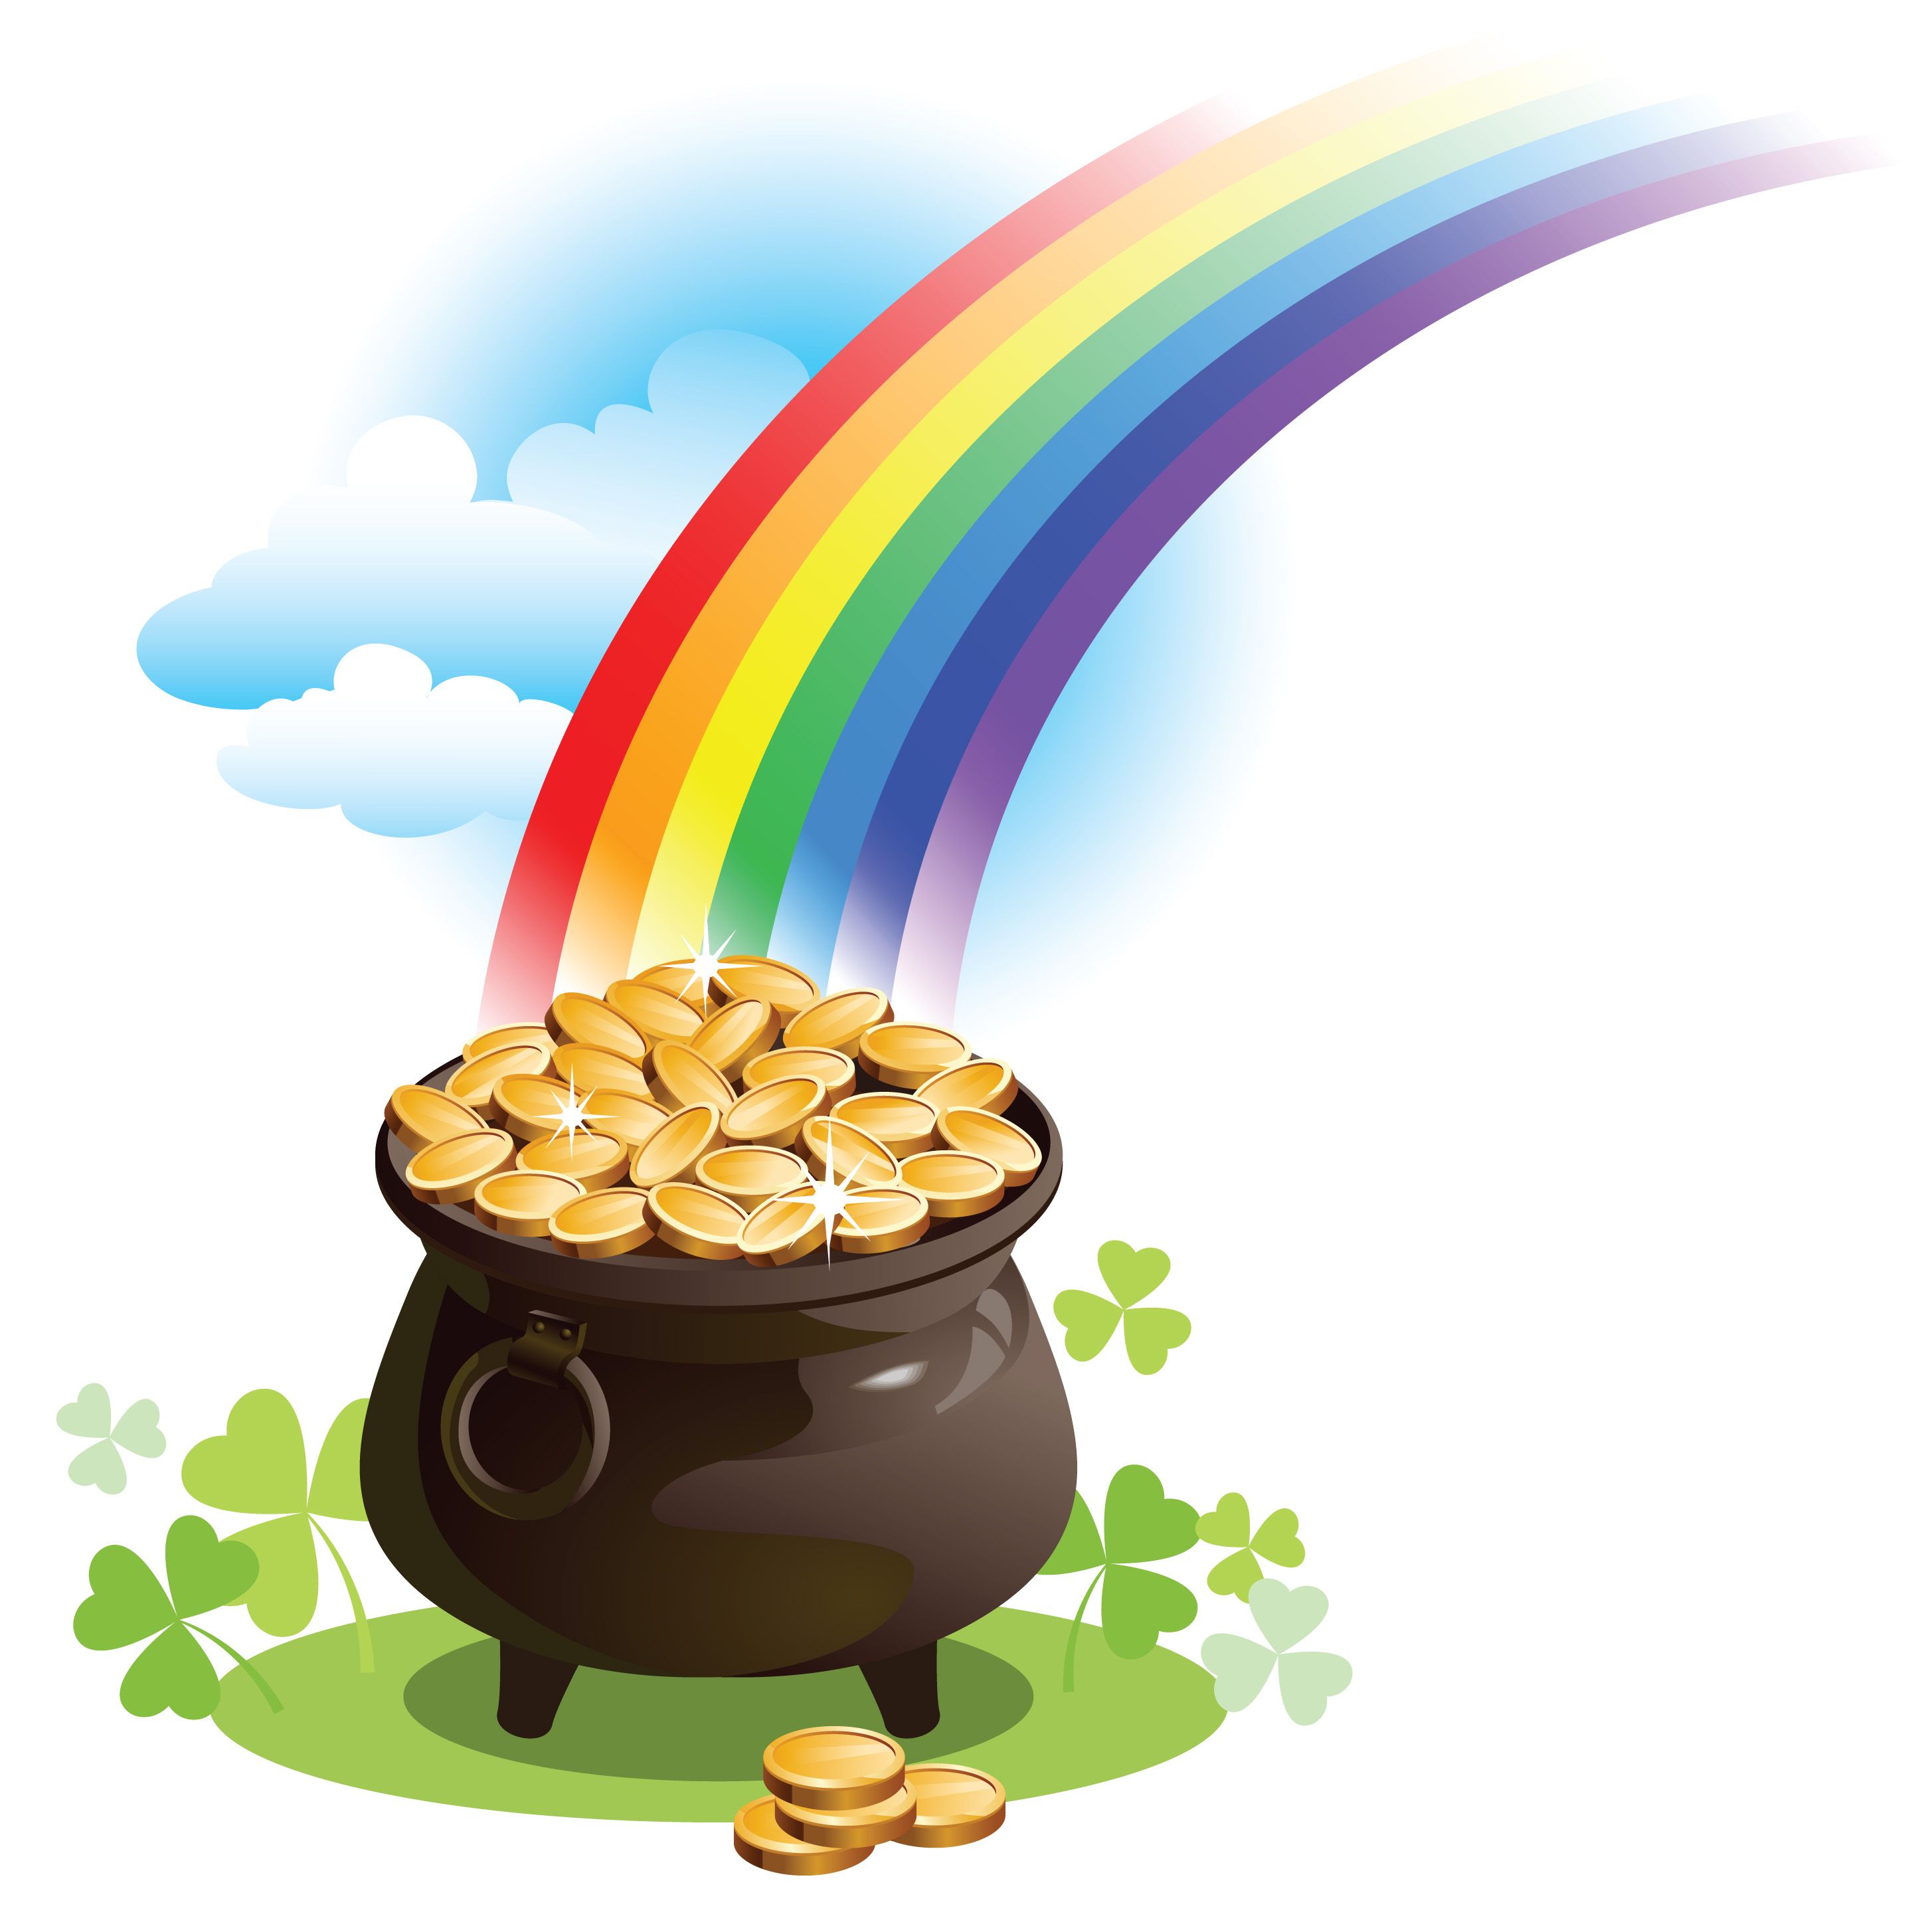 Free Picture Of A Pot Of Gold, Download Free Clip Art, Free Clip Art on Clipart Library